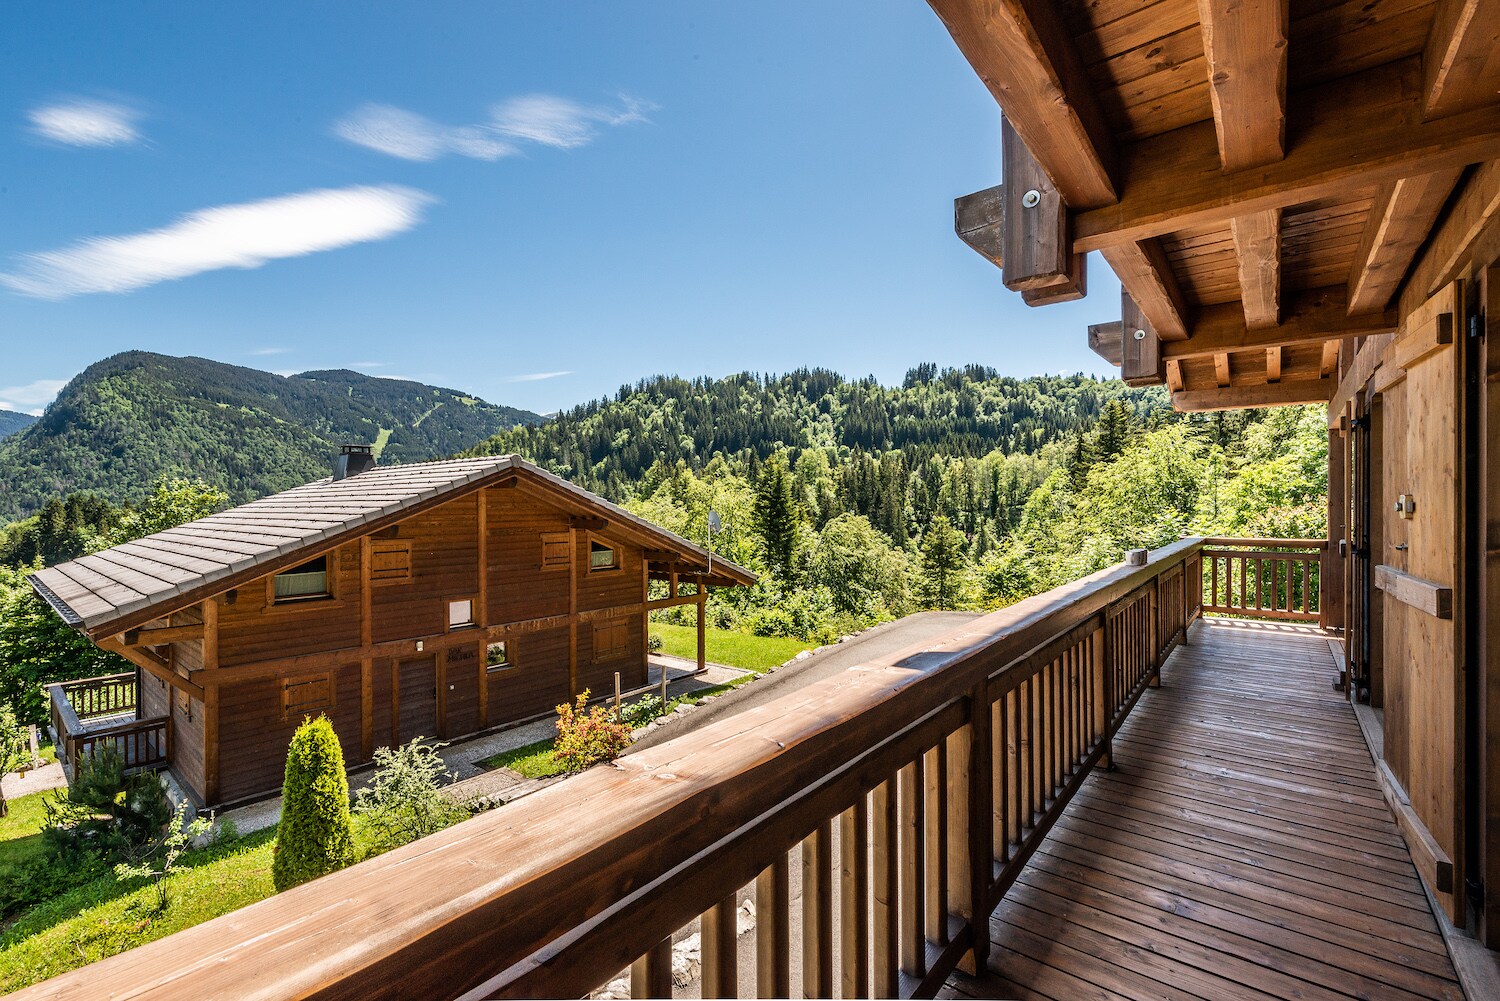 Property Image 2 - BALATA - Charming chalet with hot tub and views

